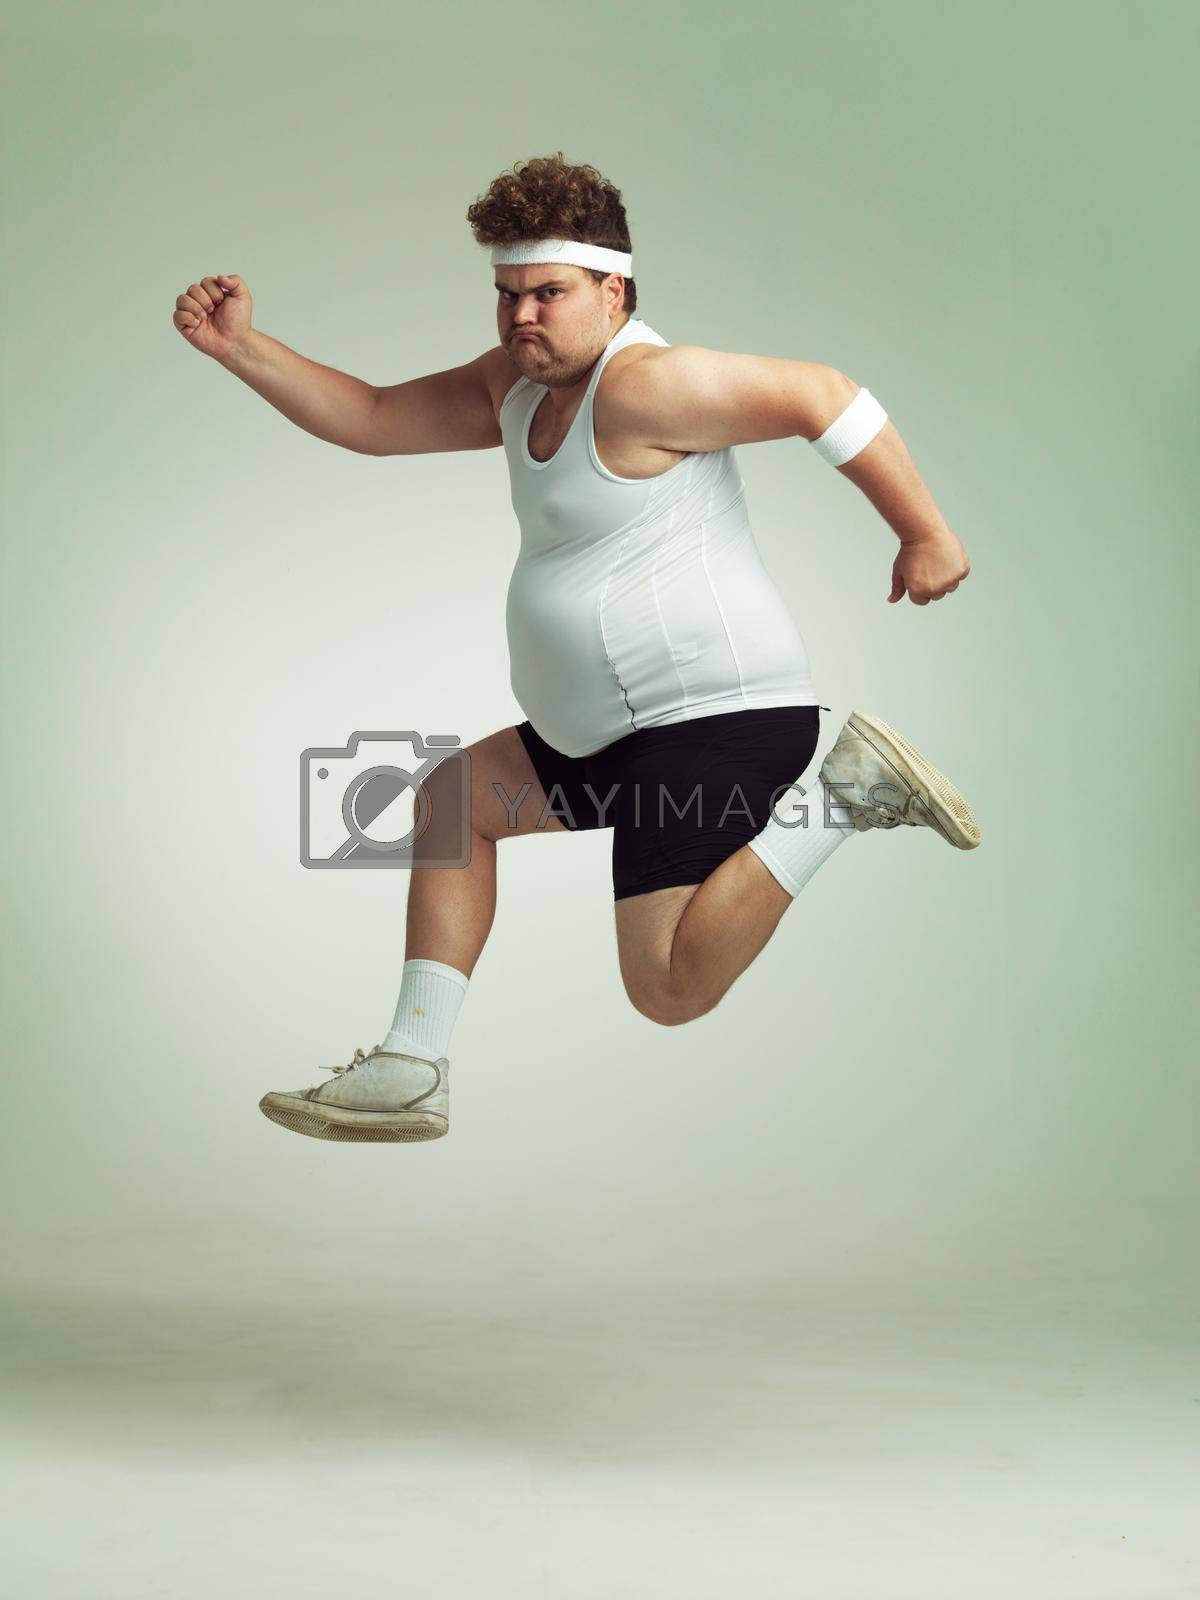 Royalty free image of I feel in shape already. Overweight man leaping in the air with his sense of achievement. by YuriArcurs